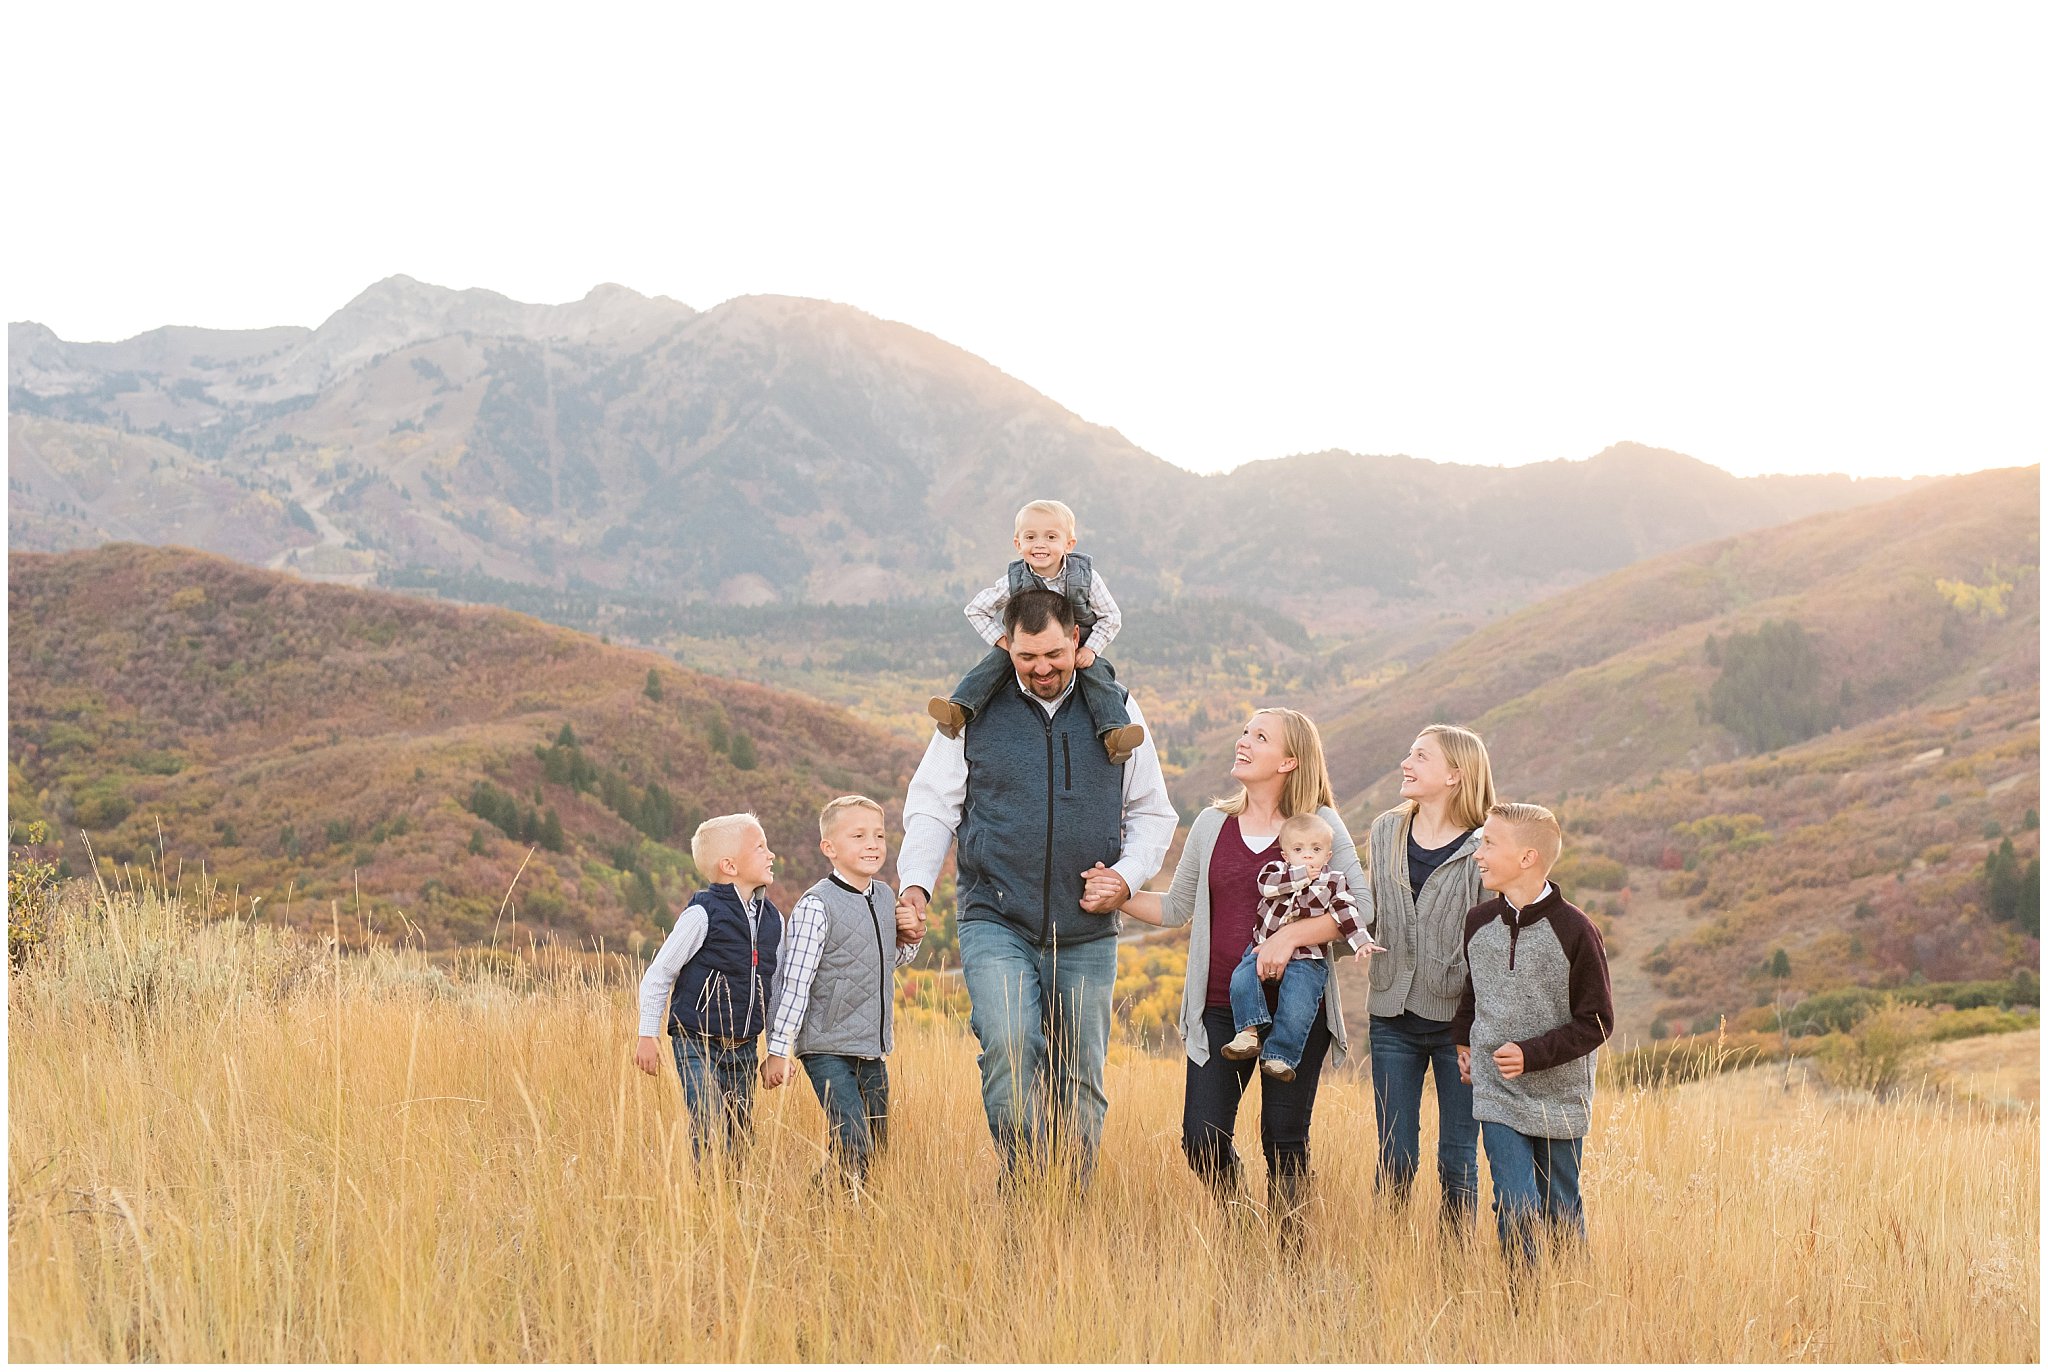 Family of 8 walking in the fall leaves | Fall family photo session at Snowbasin | Snowbasin Resort | Jessie and Dallin Photography